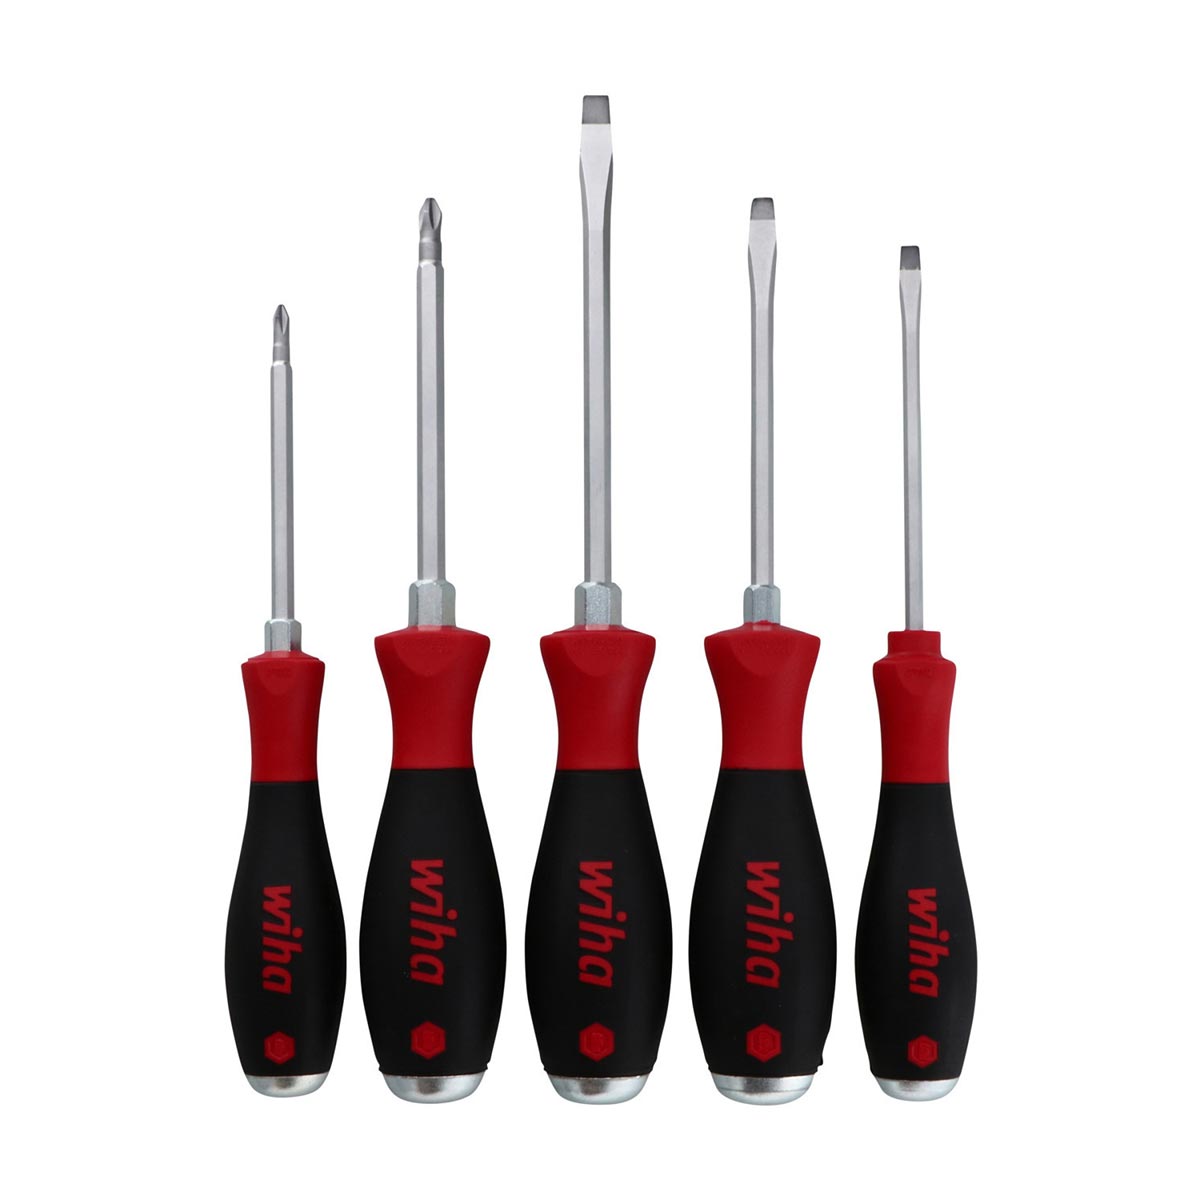 Wiha Softfinish Extra Heavy Duty Slotted And Phillips Screwdriver (5 Piece Set)